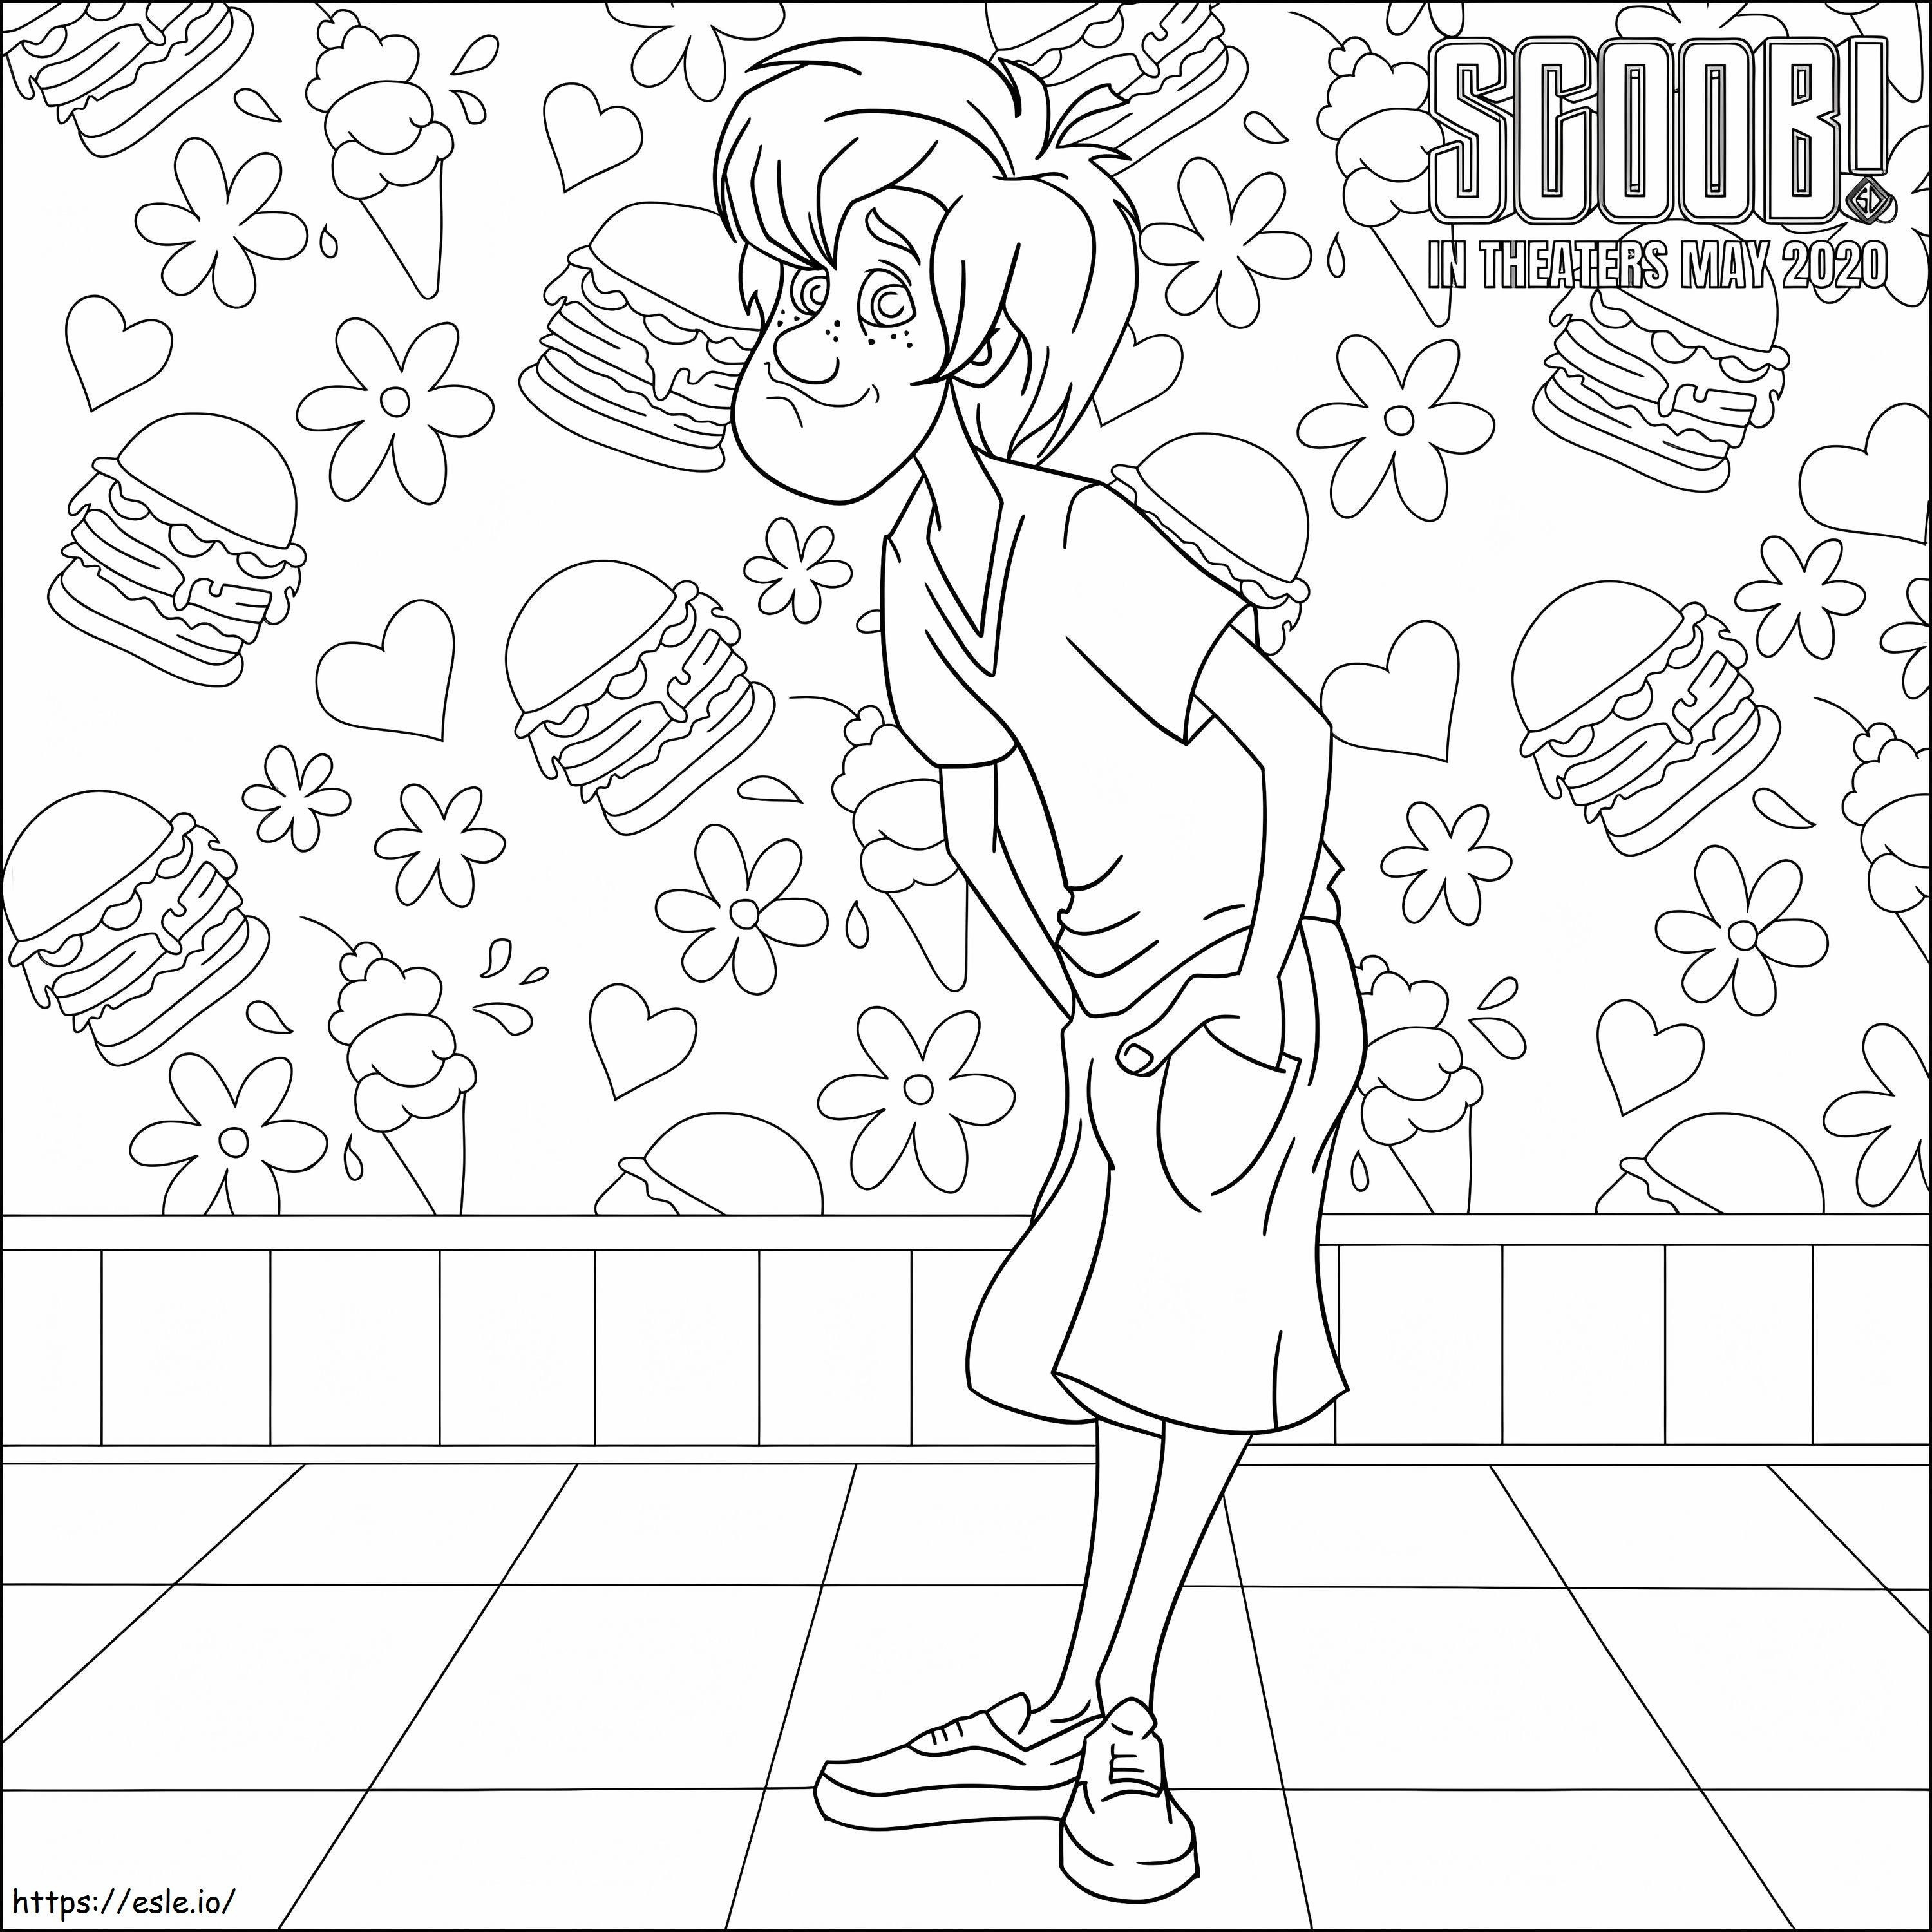 Shaggy Rogers With Food coloring page